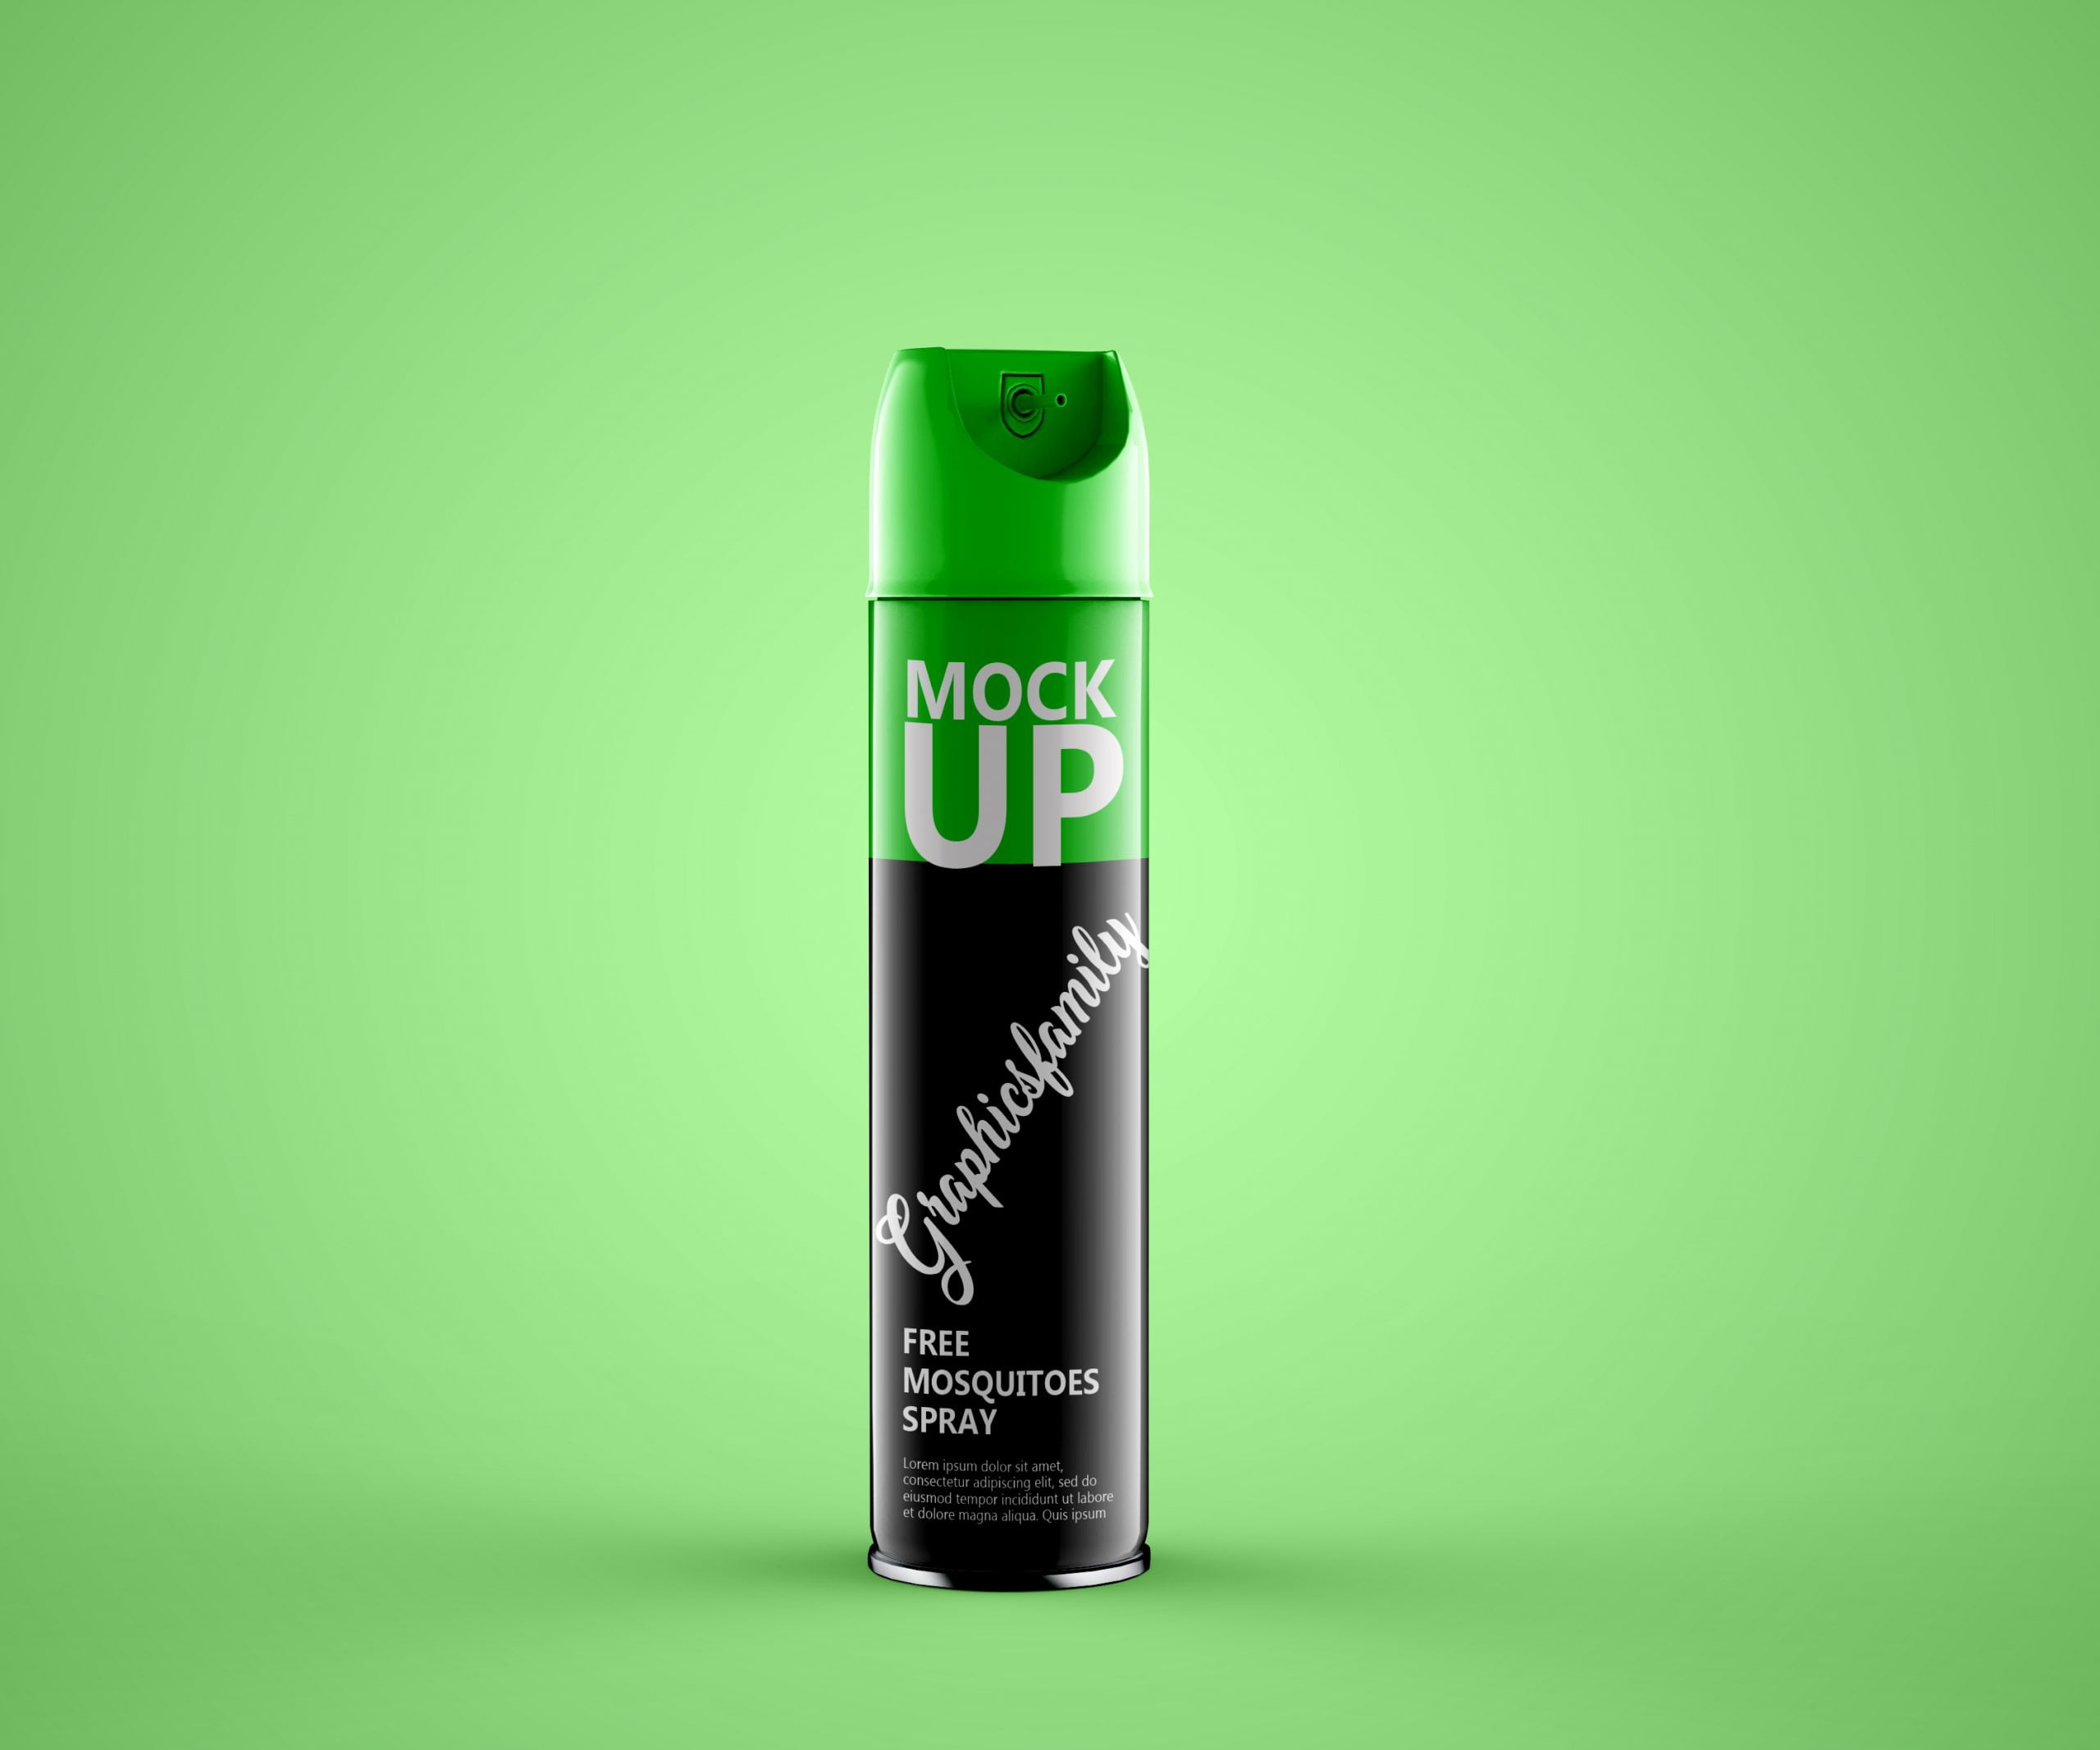 Free-Download-Mosquitoes-Spray-Mockup